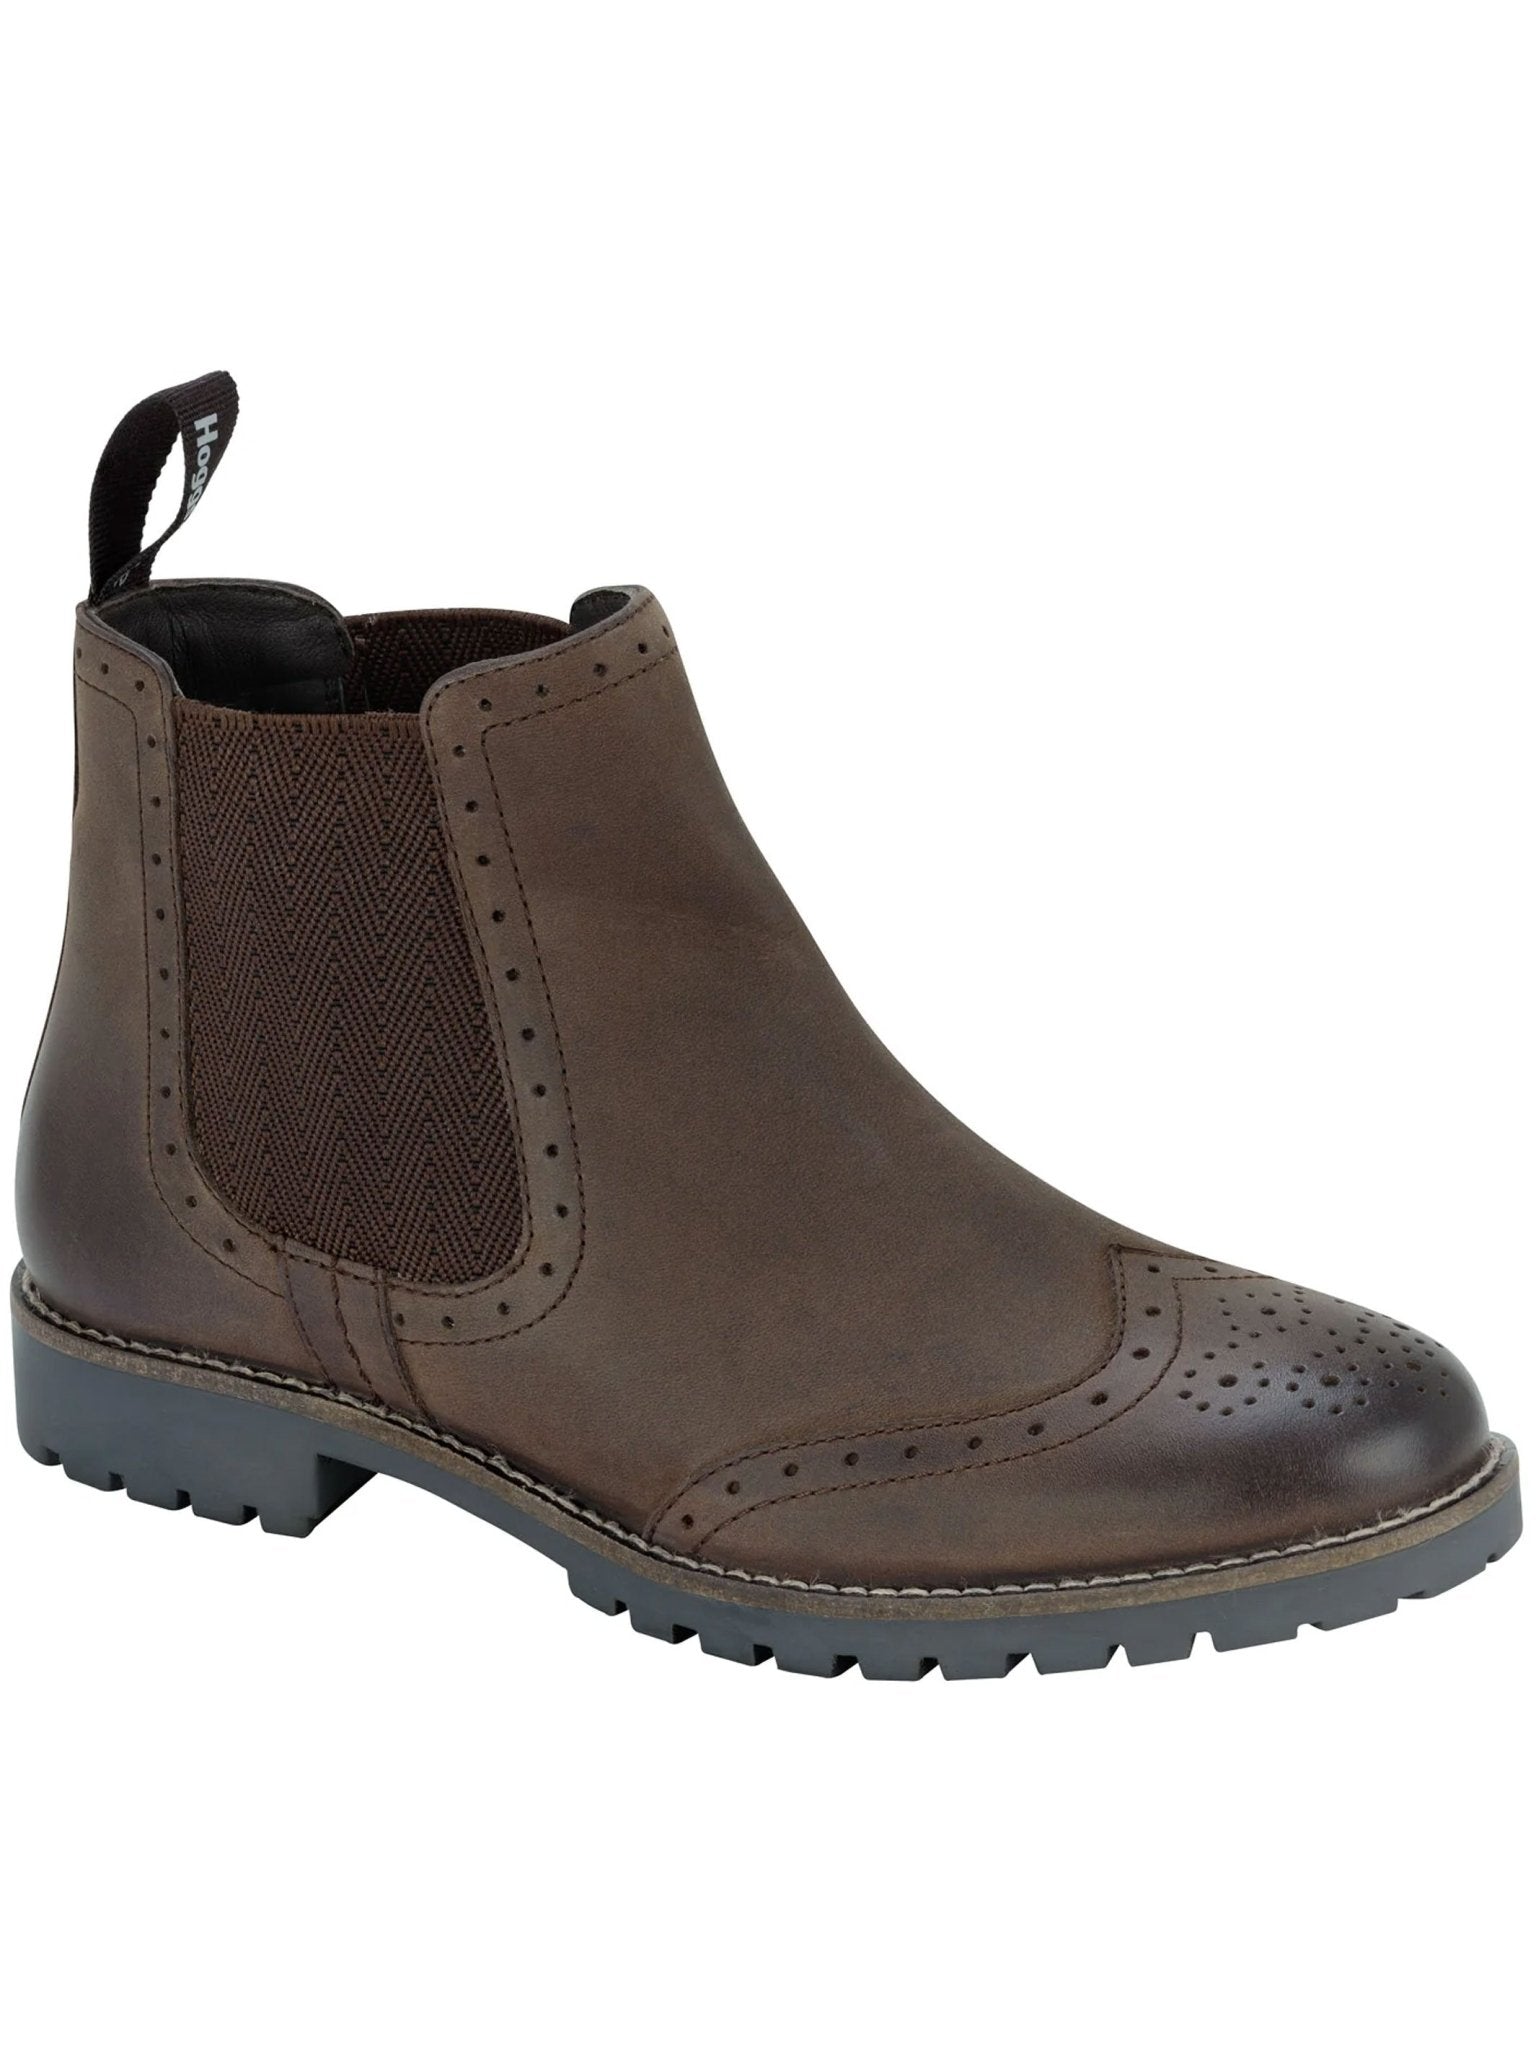 Hoggs of Fife Hoggs of Fife - Ladies Paddock Boots / Classic Brogue Dealer / Chelsea Boot Boots